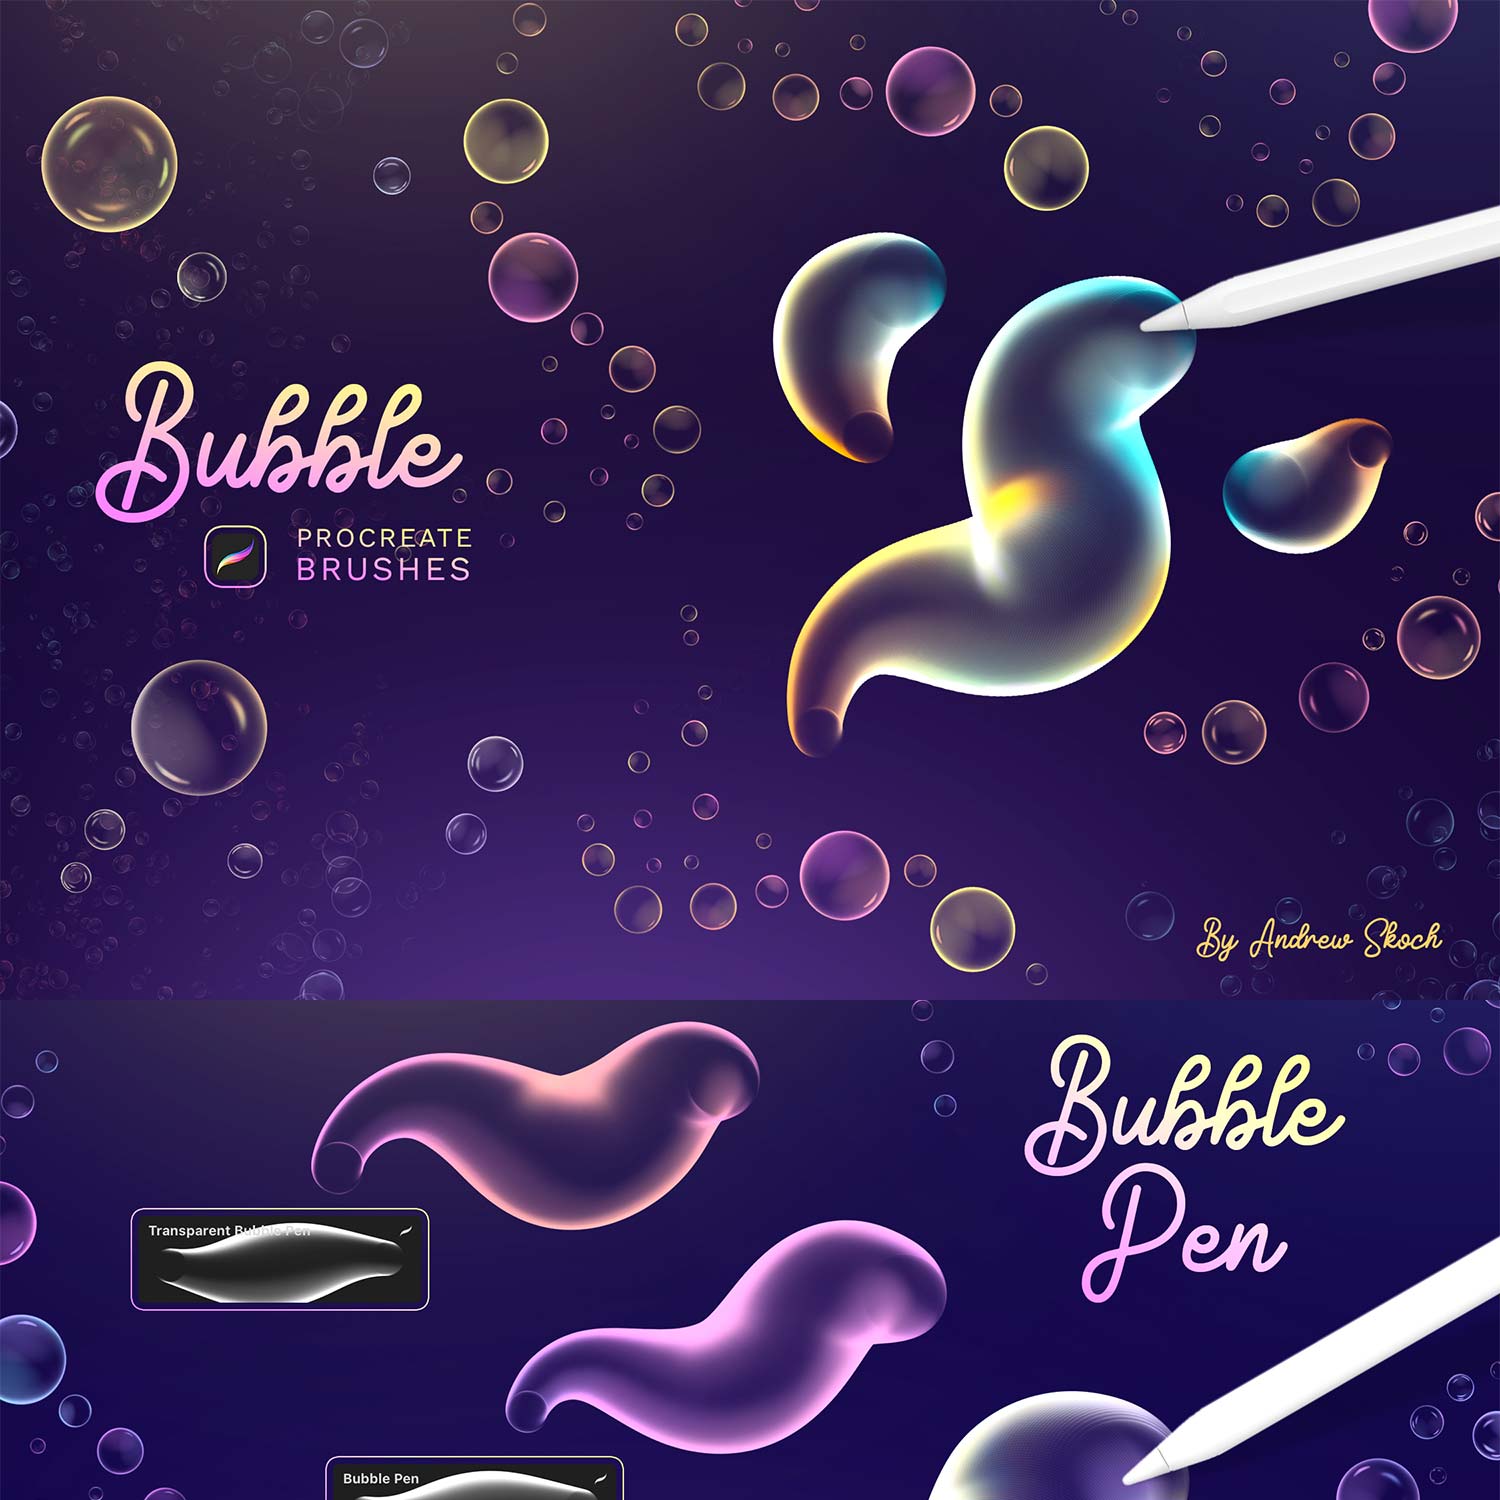 Bubbles Procreate Brushes cover image.